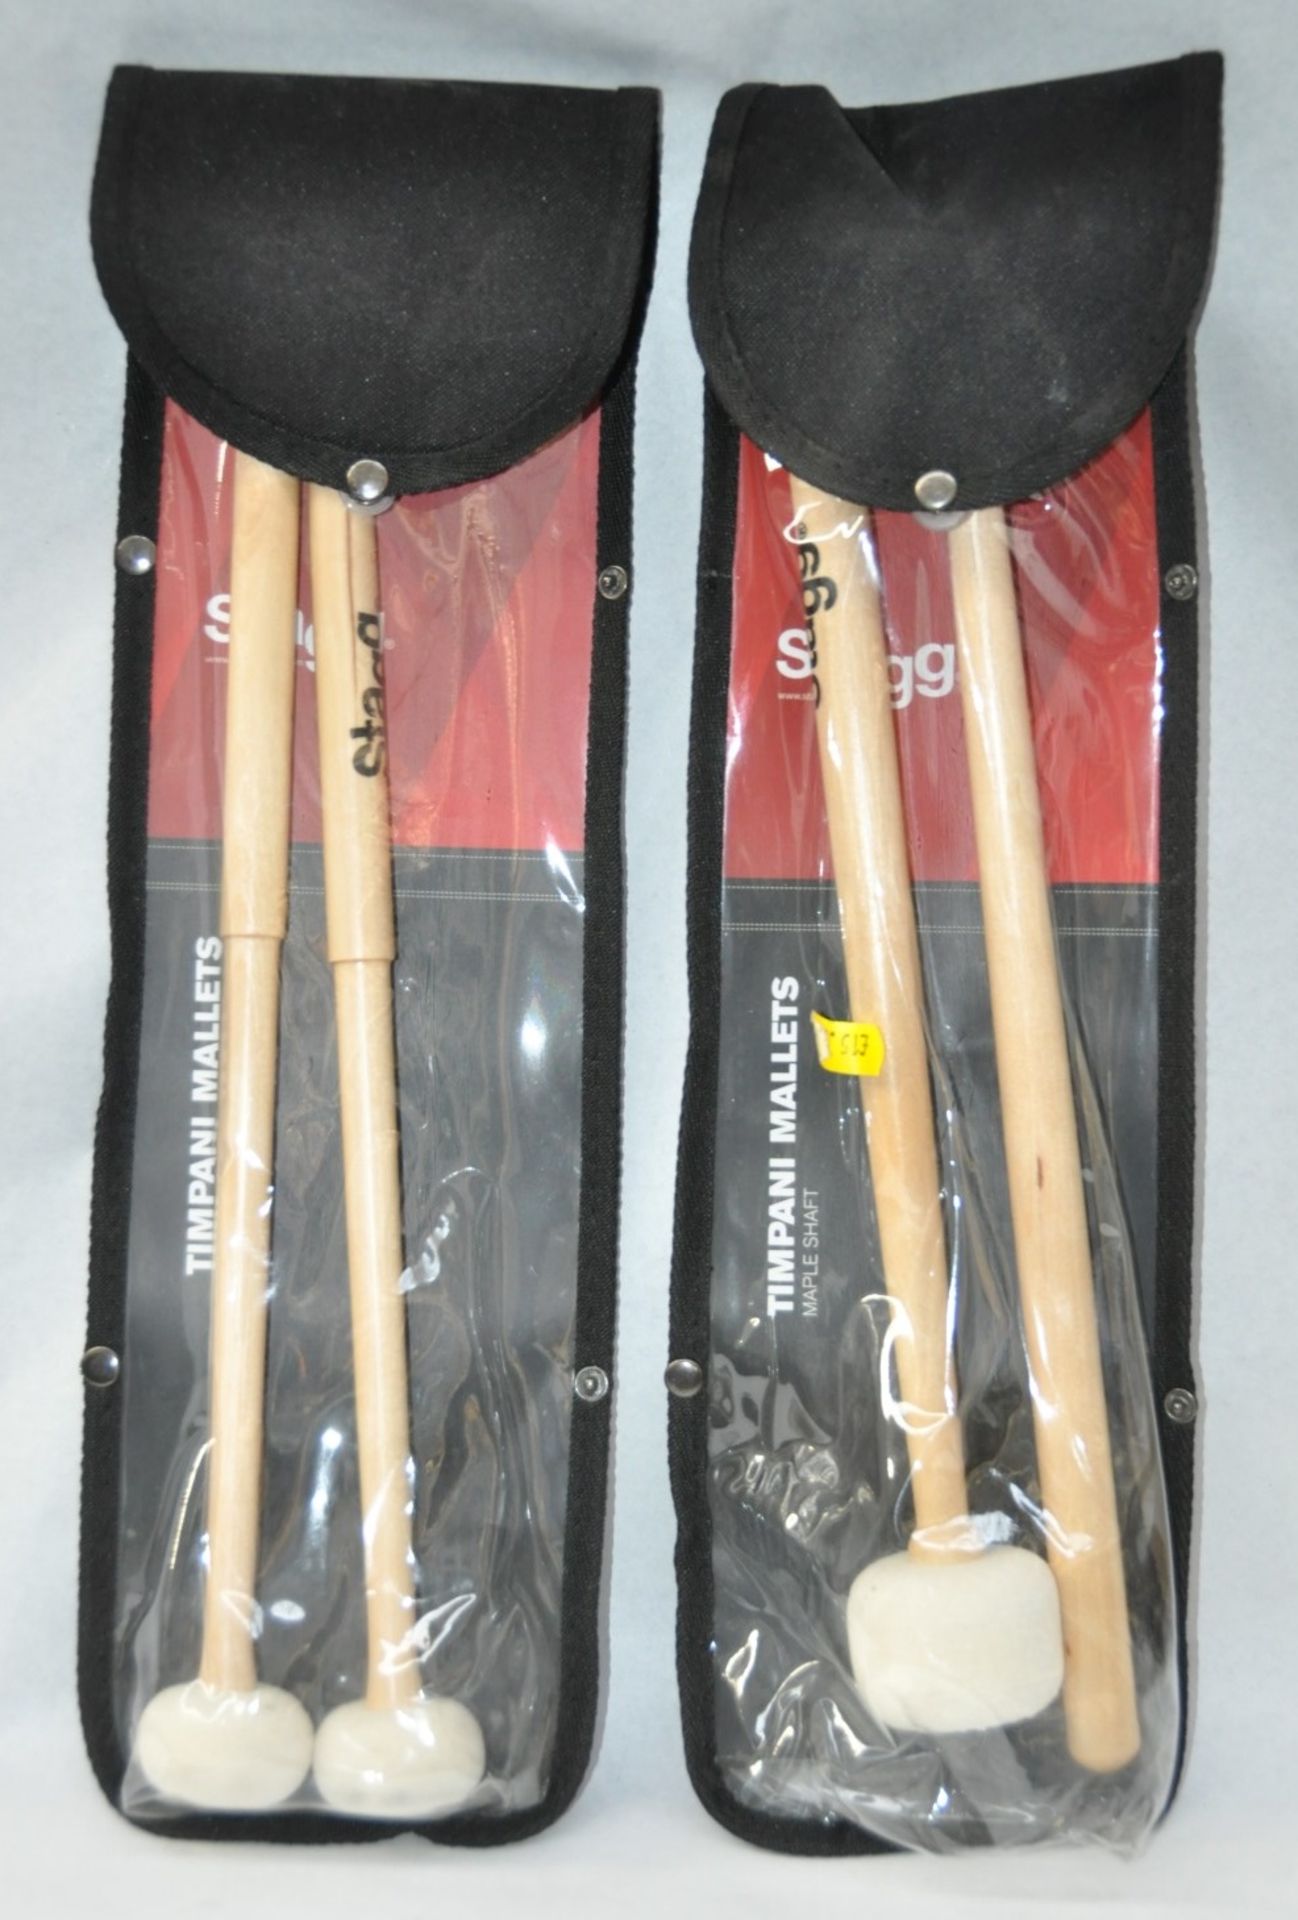 3 x Sets of Stagg Timpani Mallets With Maple Shafts - New Stock - CL020 - Ref Pro26 - Location: